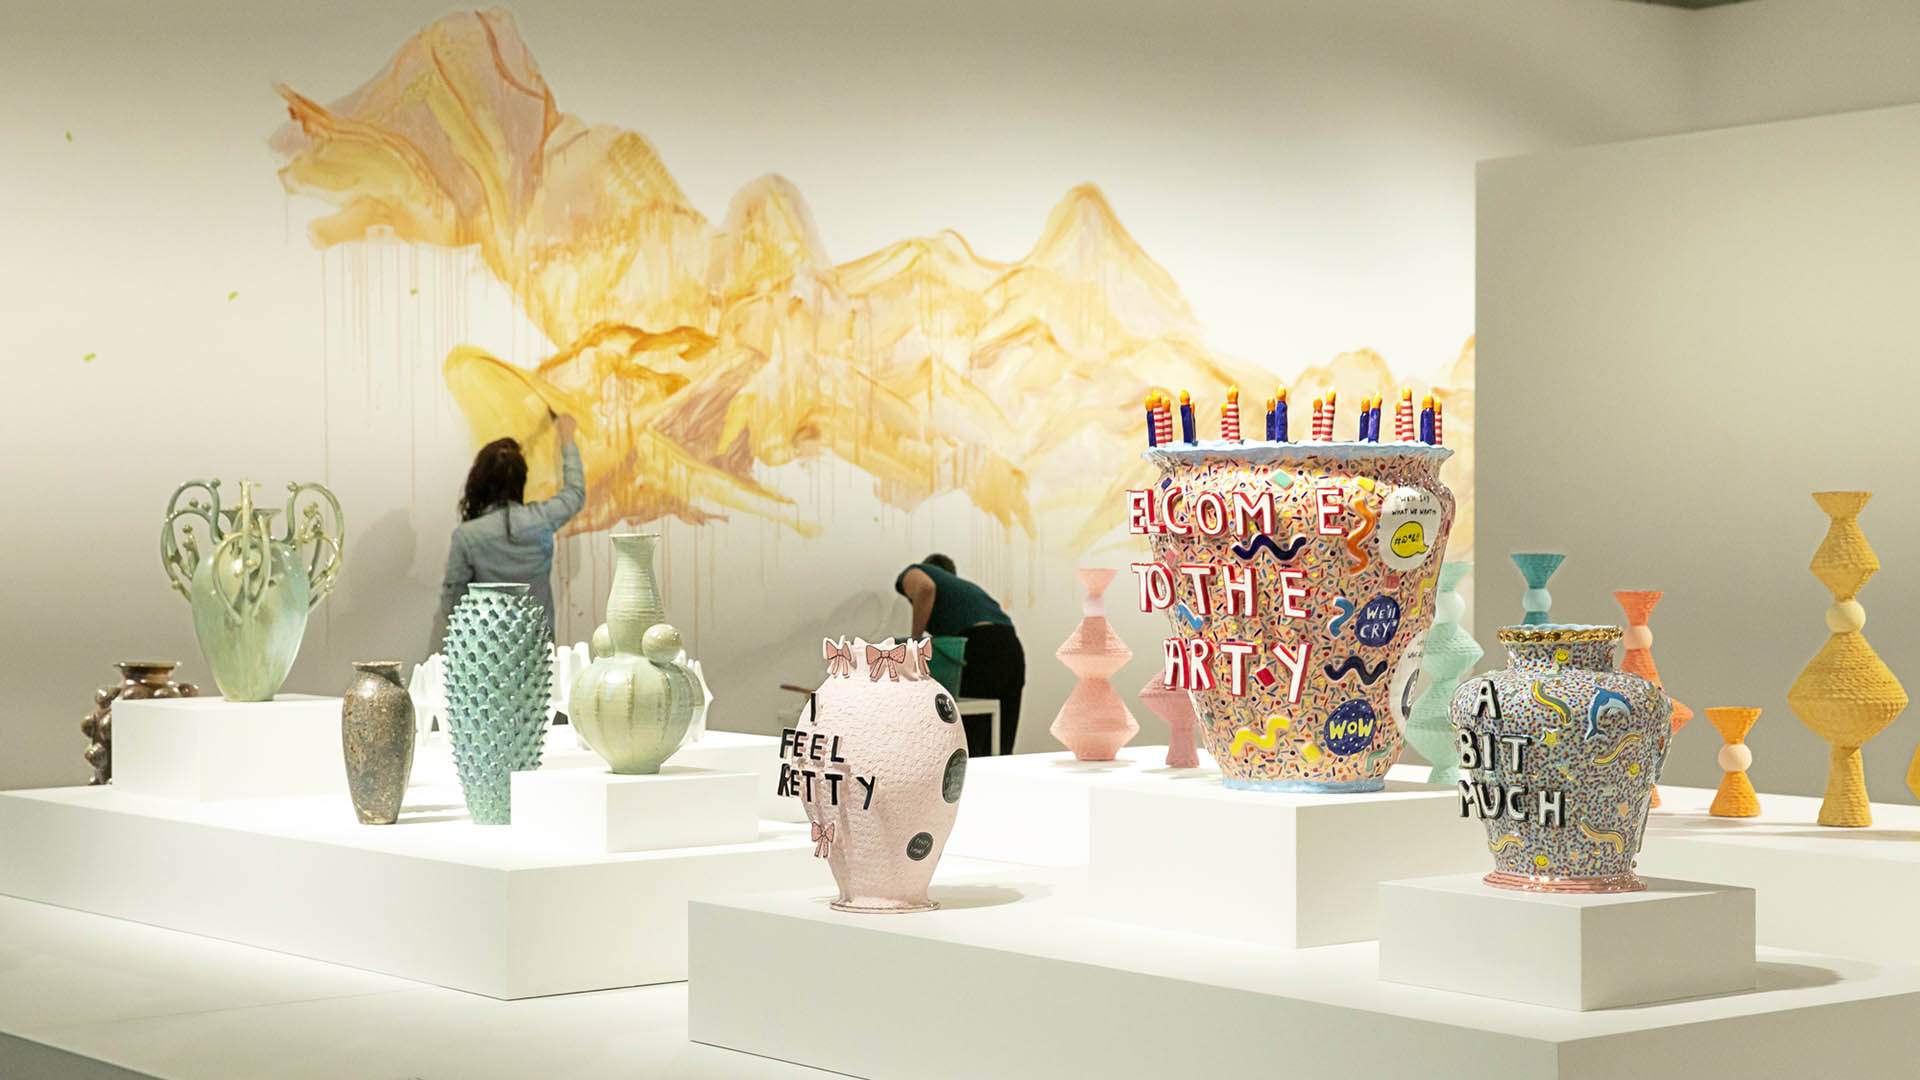 Museum of Brisbane's Latest Big (and Free) Exhibition Is All About Clay, Pottery and Ceramics